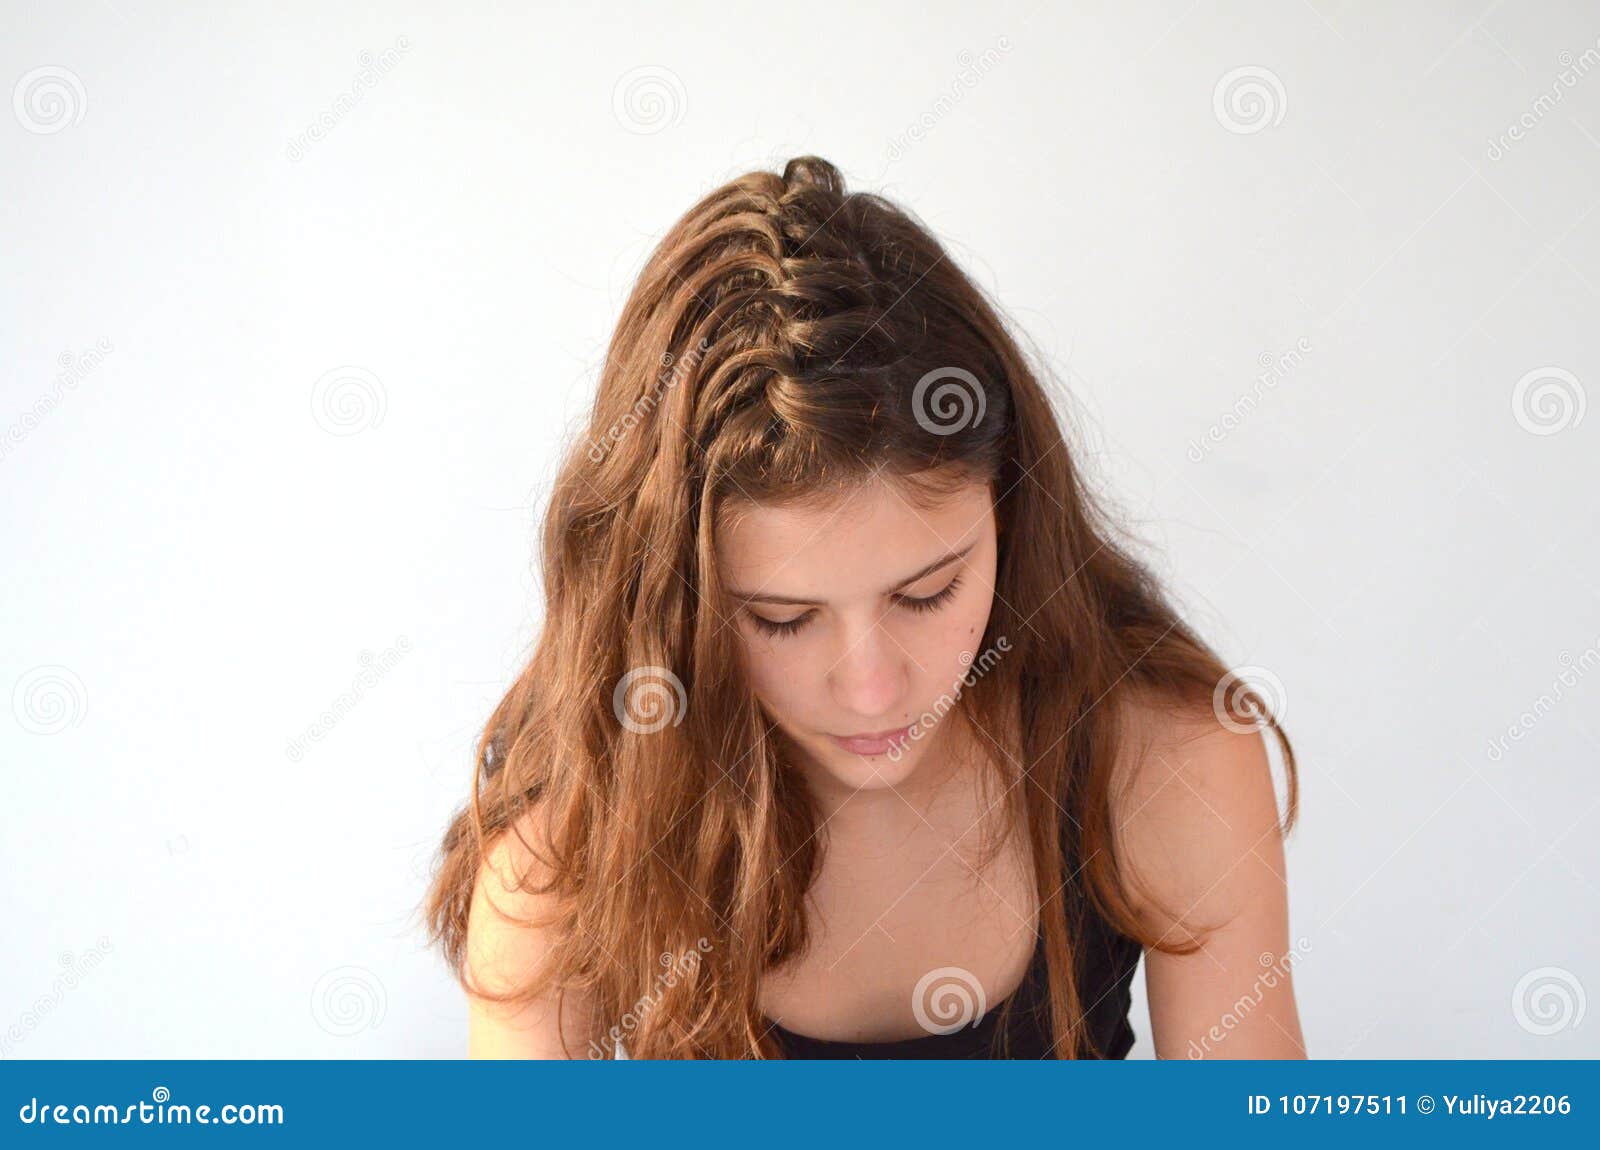 Hairstyle On Medium Length Of Hair Stock Image Image Of